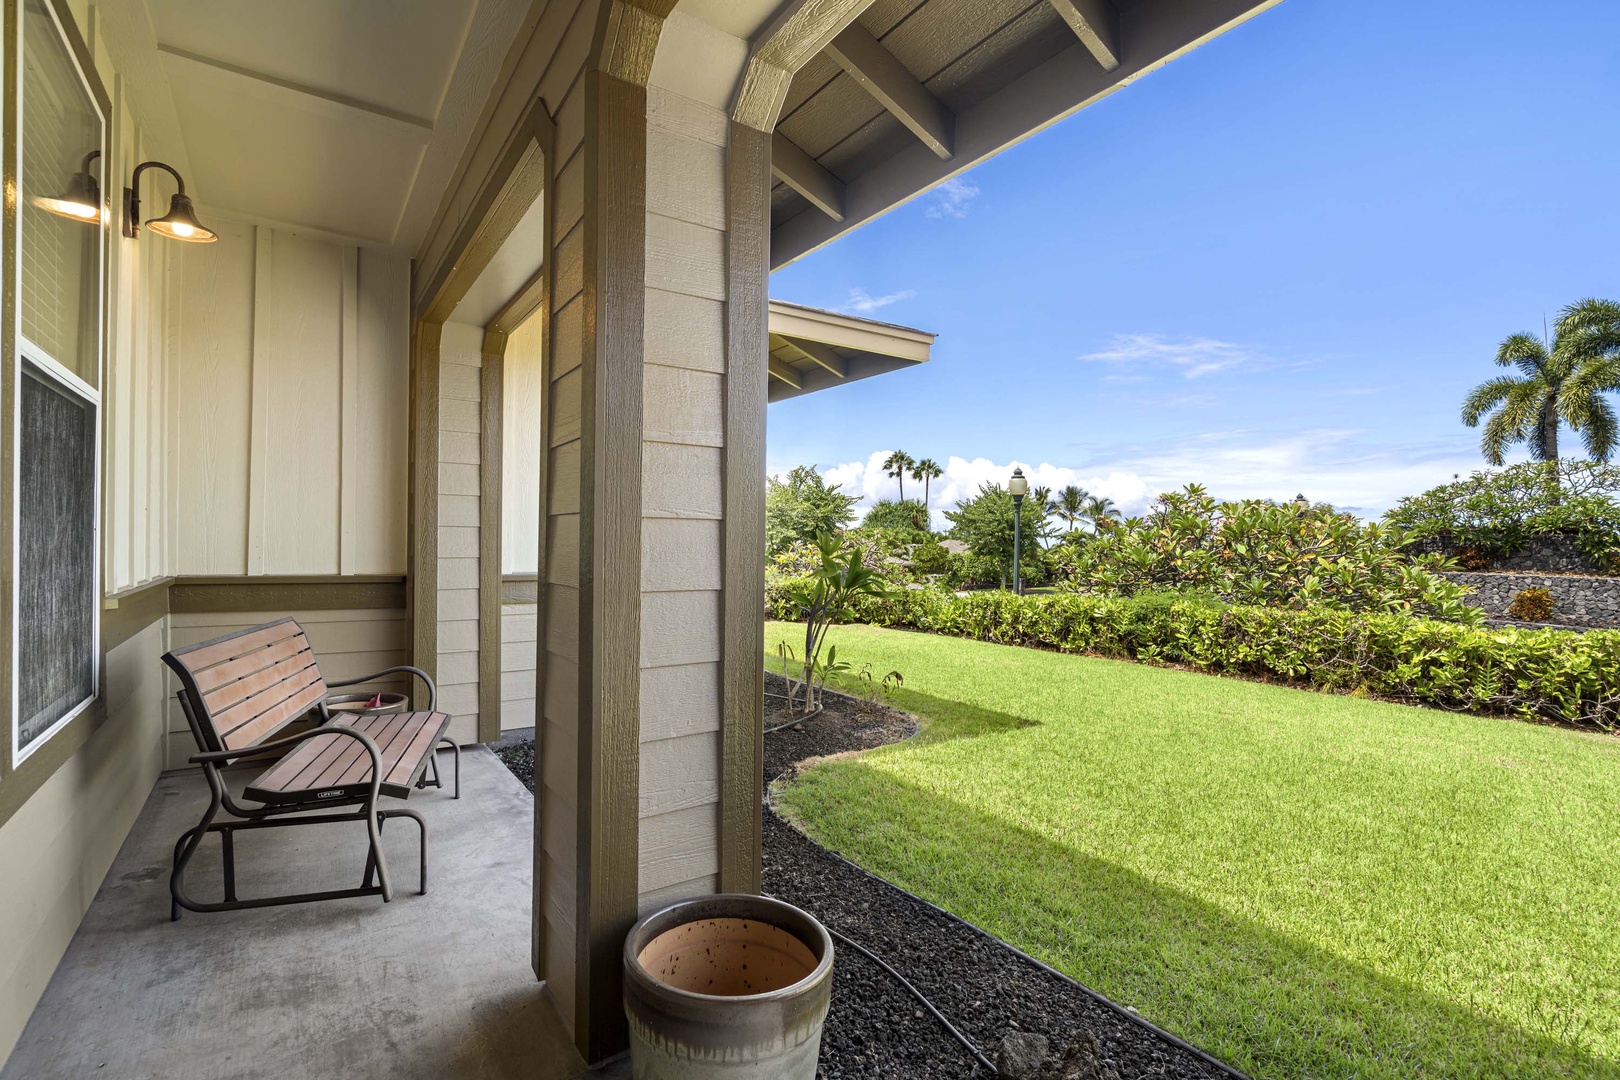 Kailua Kona Vacation Rentals, Kahakai Estates Hale - Welcome home! The inviting front porch sets the tone for a cozy and warm atmosphere.